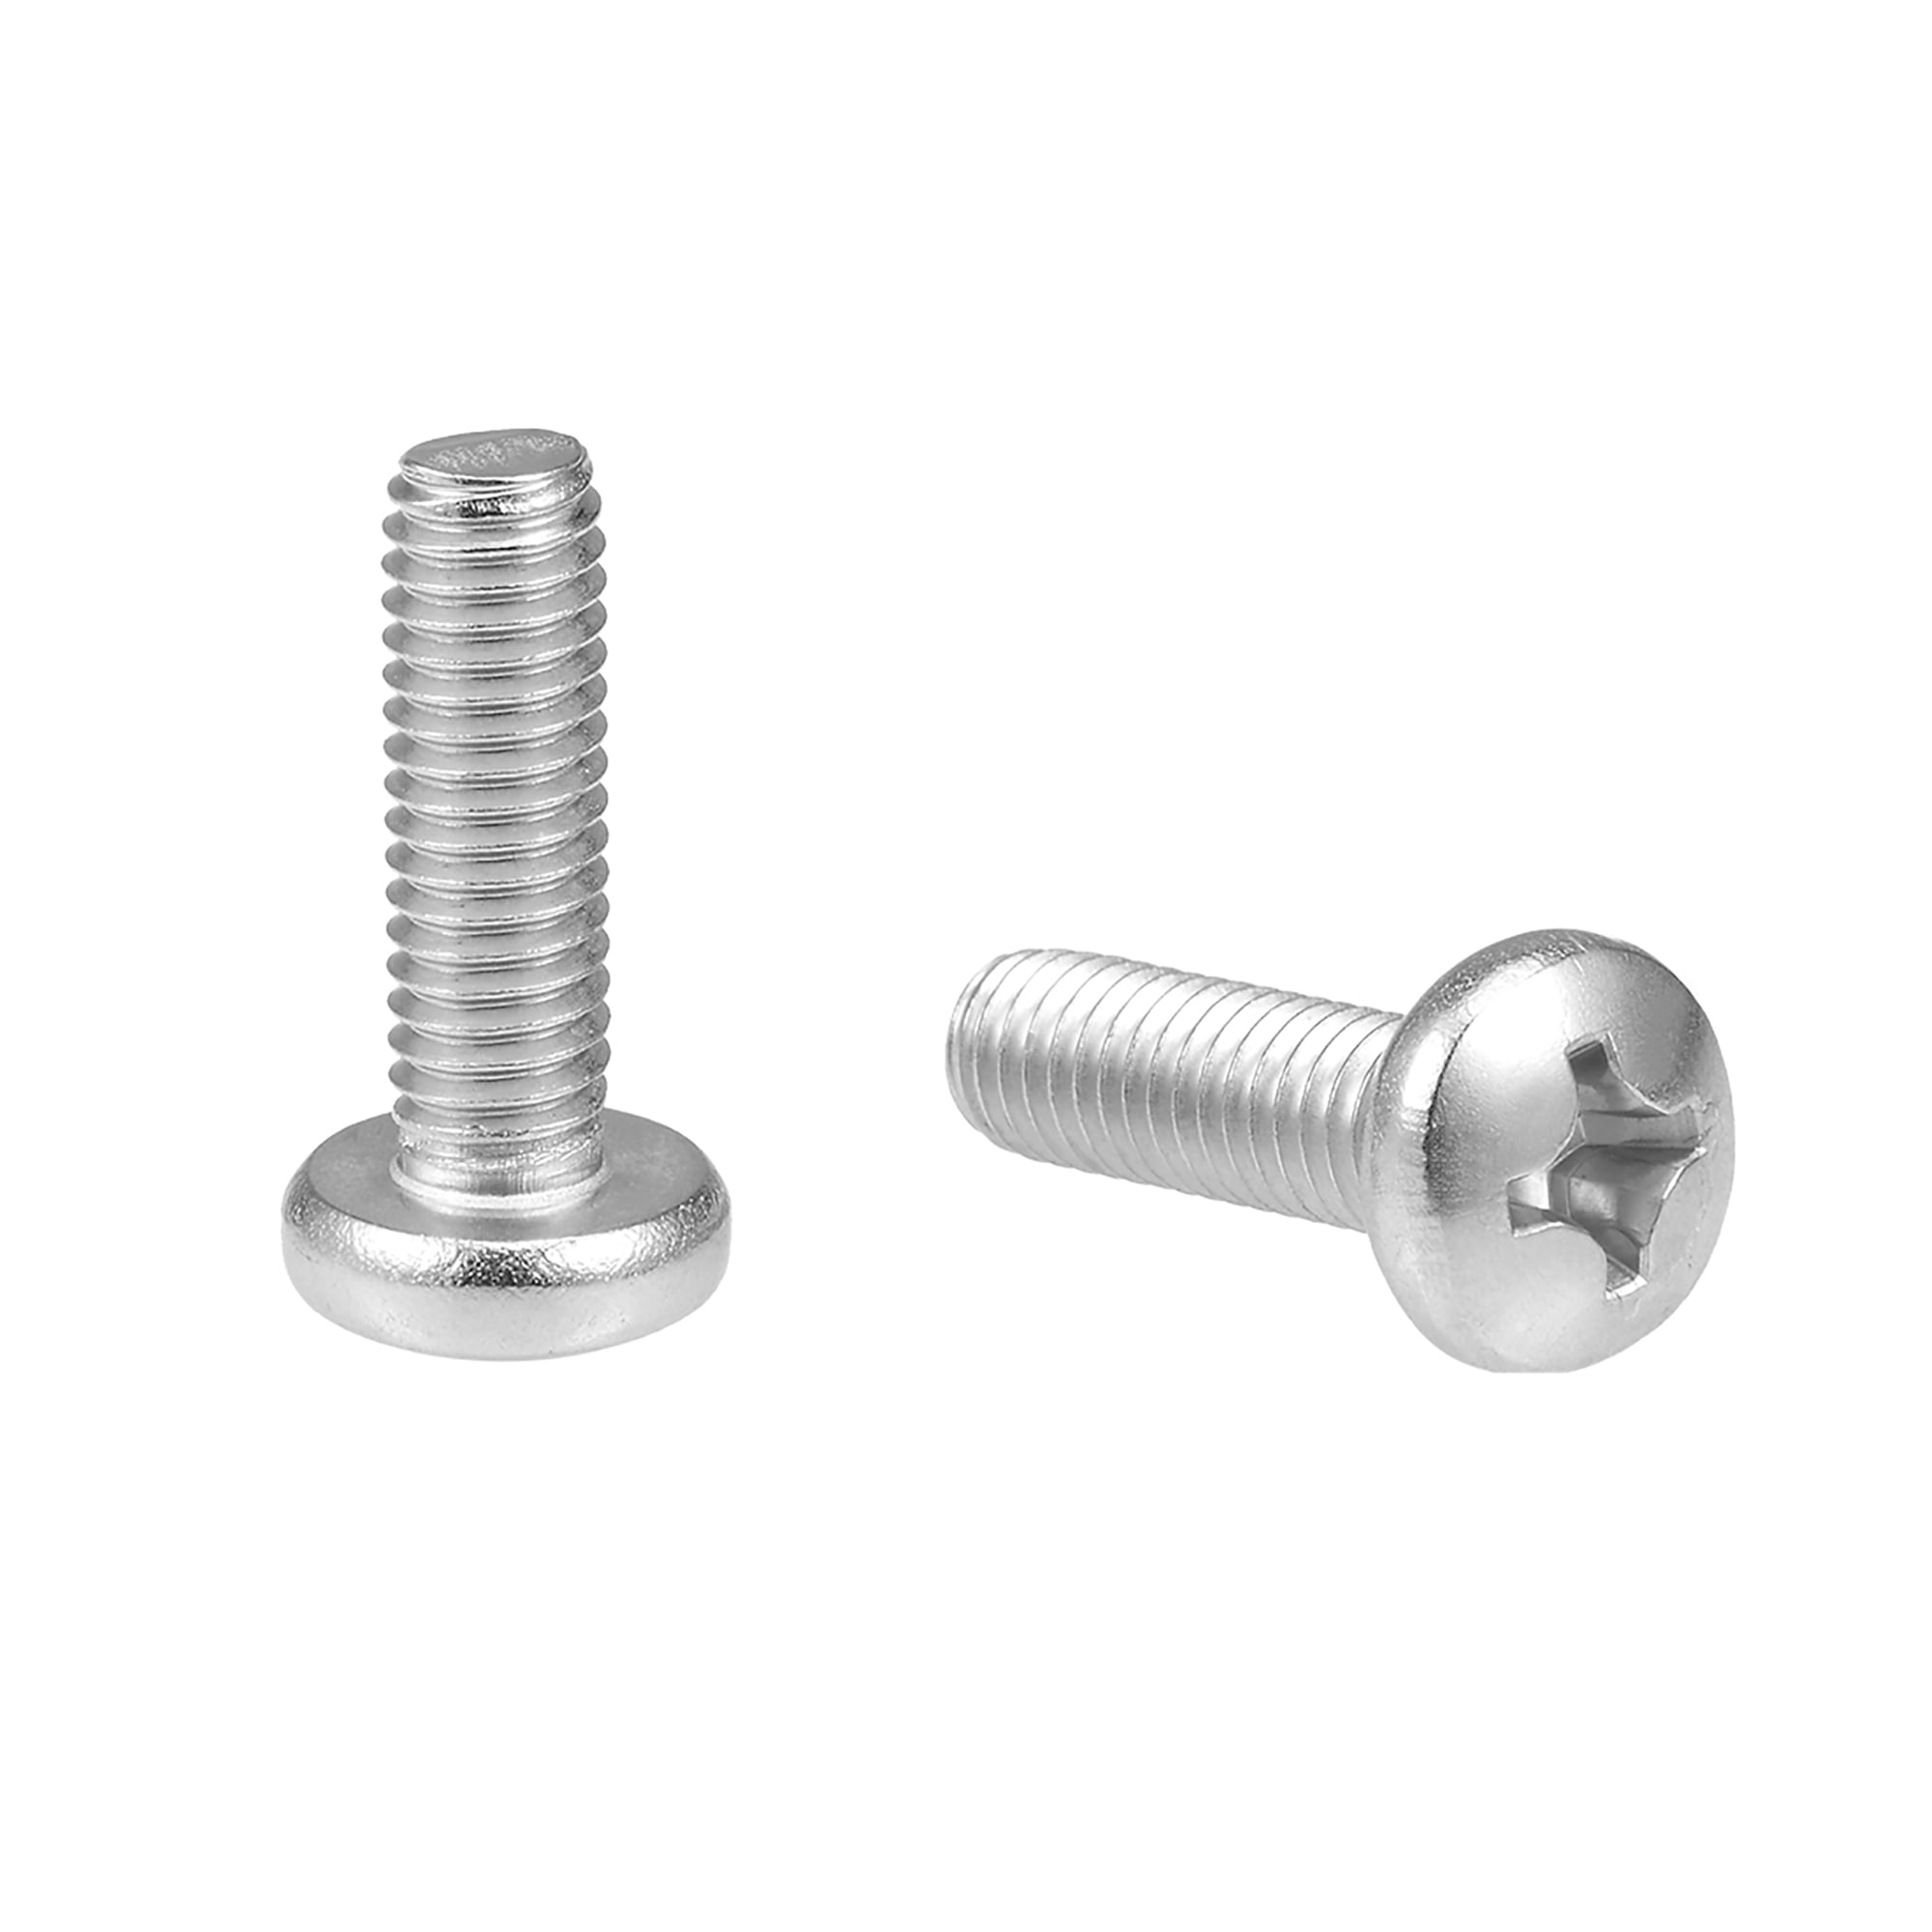 M6 x 50mm Furniture Screws Nut Set Hexagon Head Screw with Barrel Nuts Zinc Plated with Phillips Grooves 20 Sets